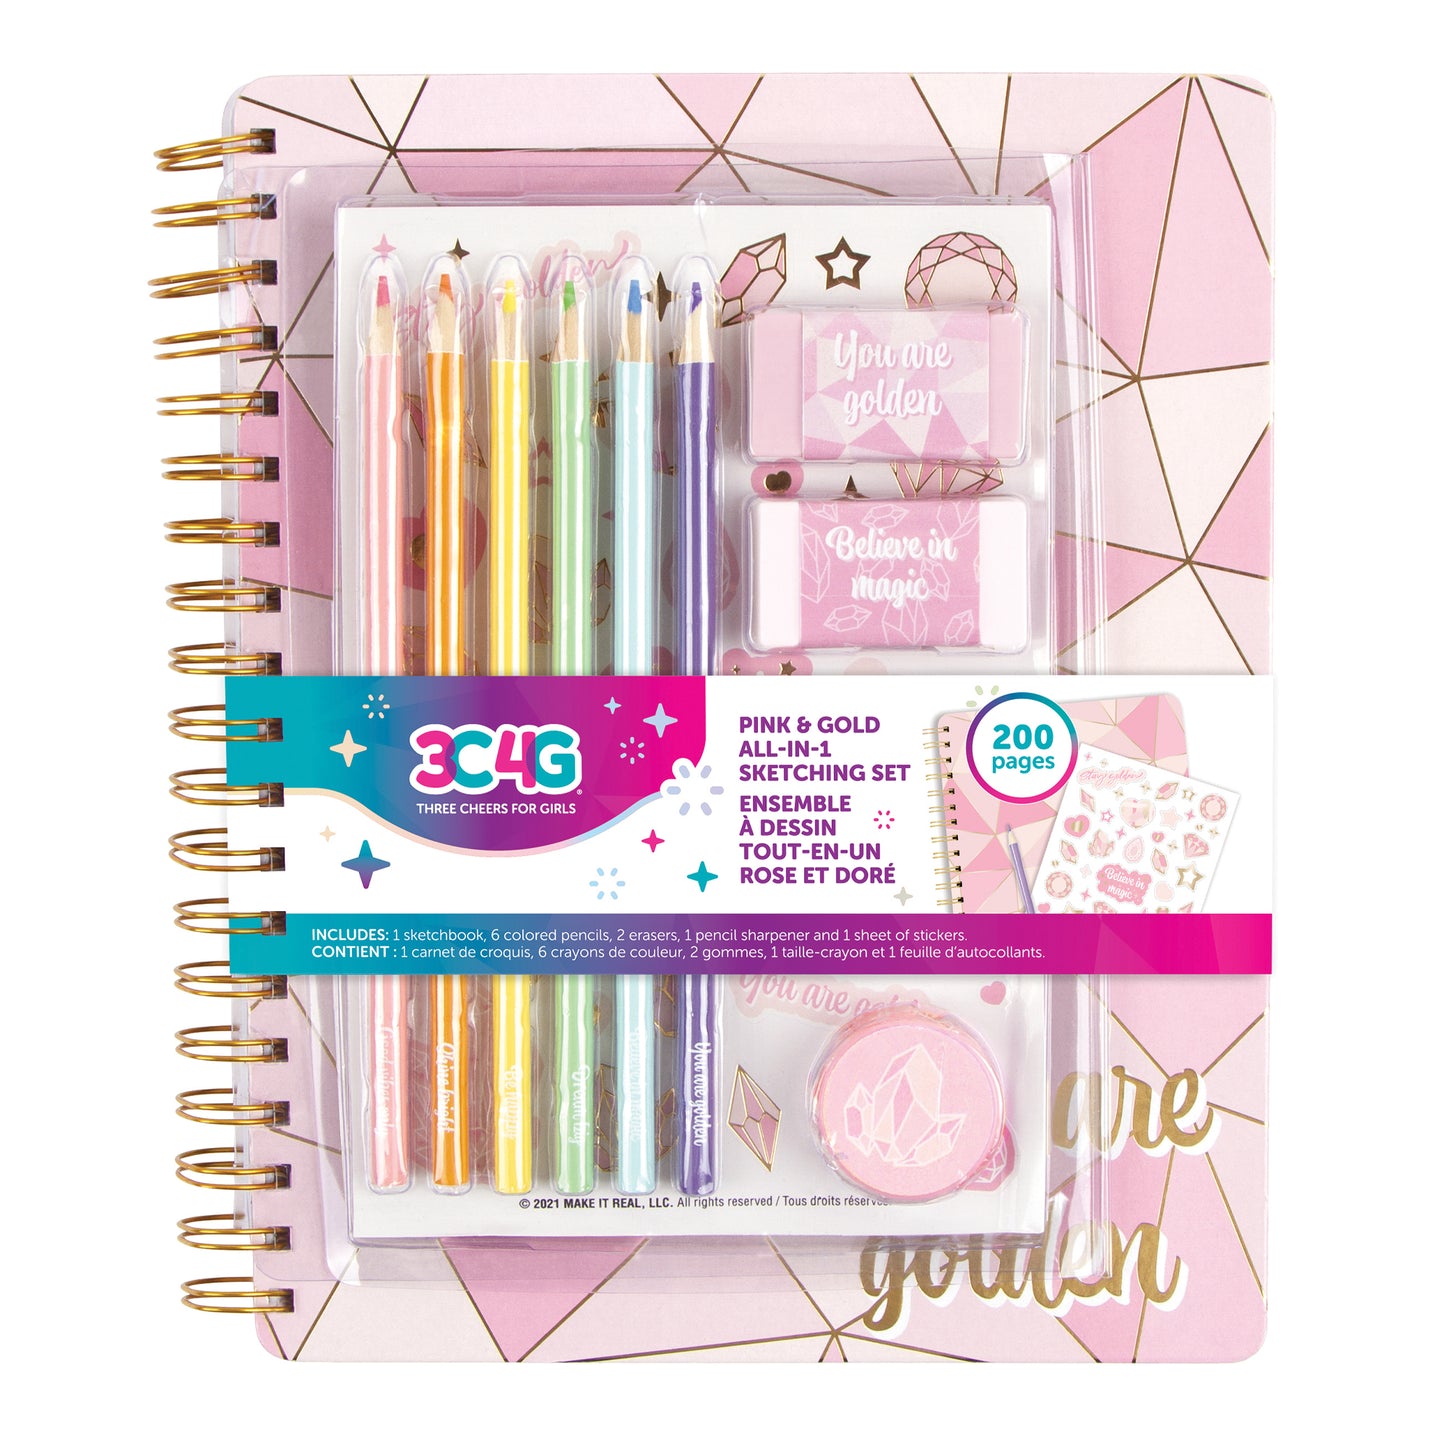 3C4G Pink & Gold All in 1 Sketching Set